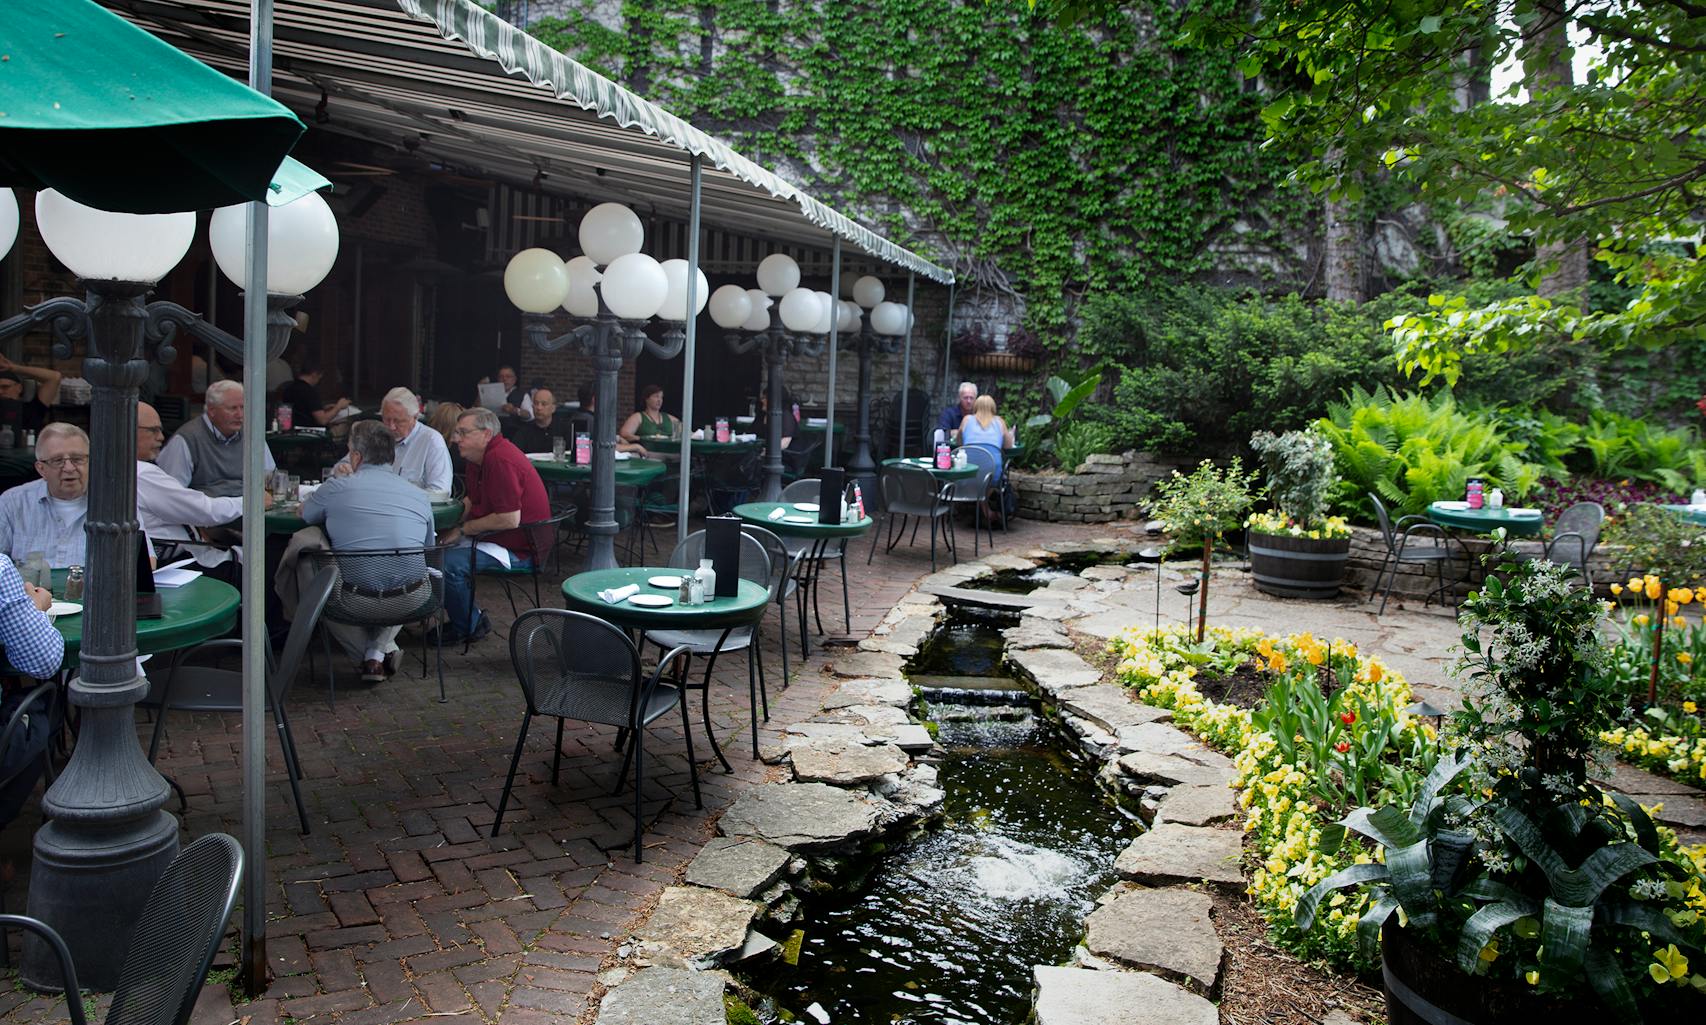 Jax Cafe in northeast Minneapolis. A patio garden, with a stream, a water wheel, flowers, a tented seating area. [ Sidewalks Cafe’s Photos by Rick Nelson